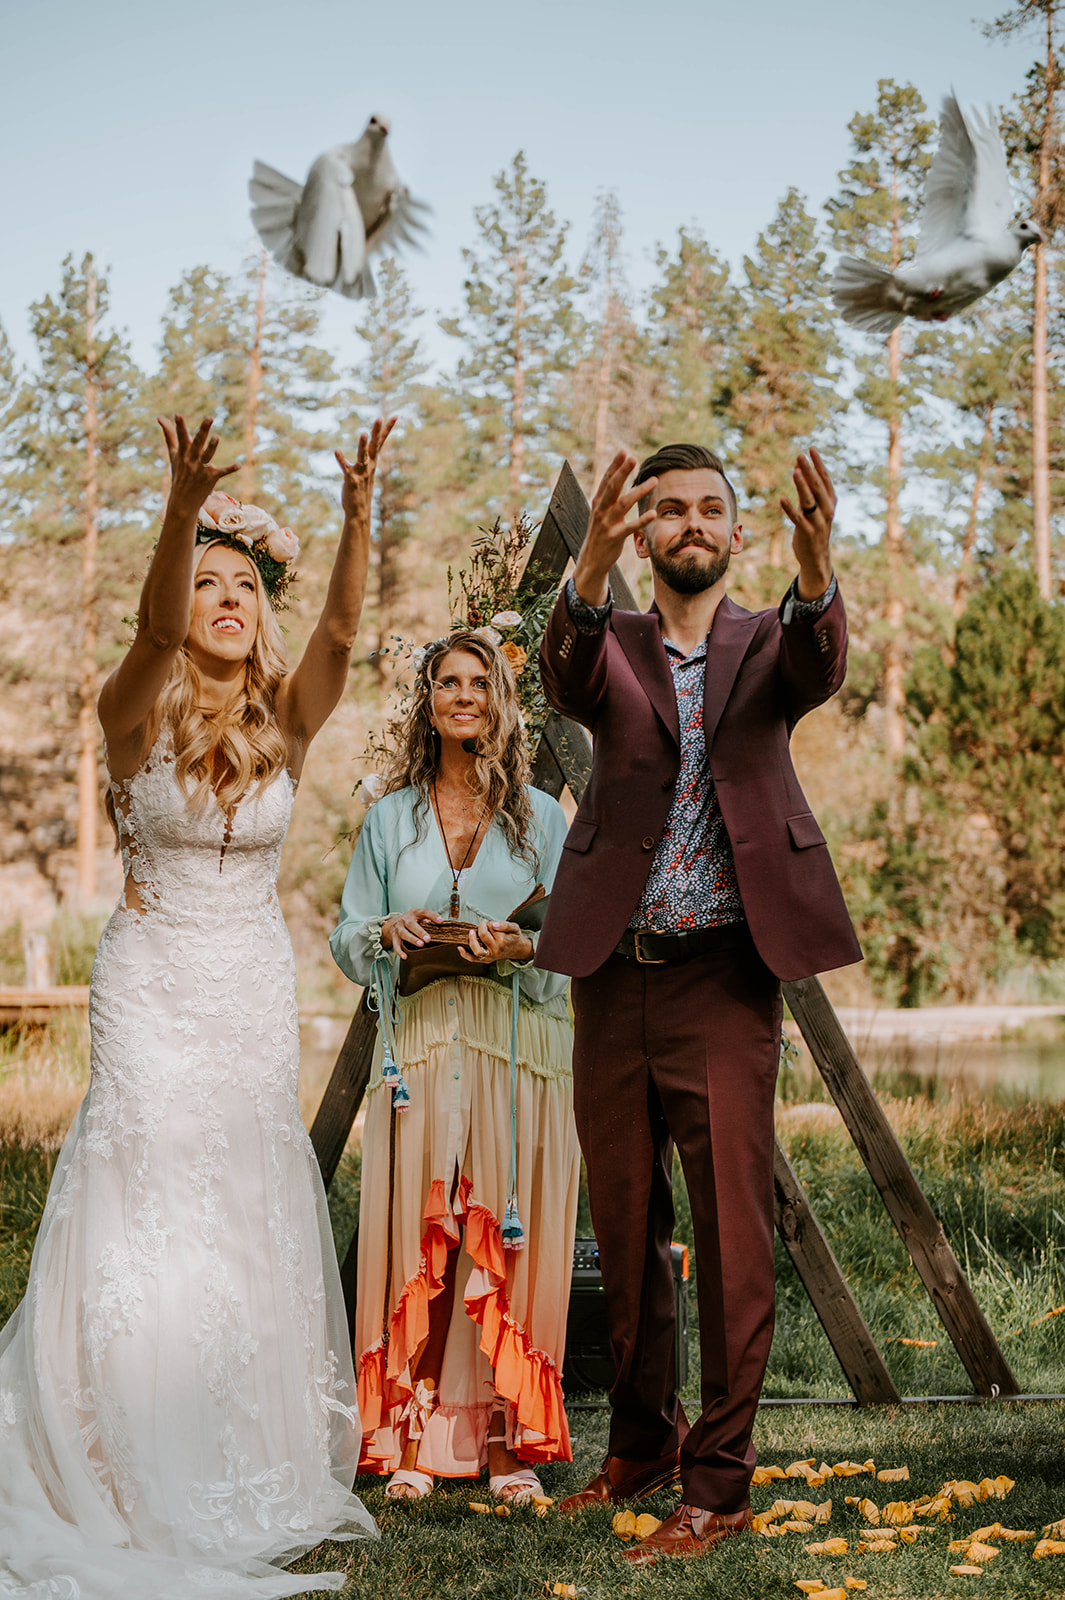 Bride and groom releasing doves during their wedding ceremony at aspen hall in bend oregon